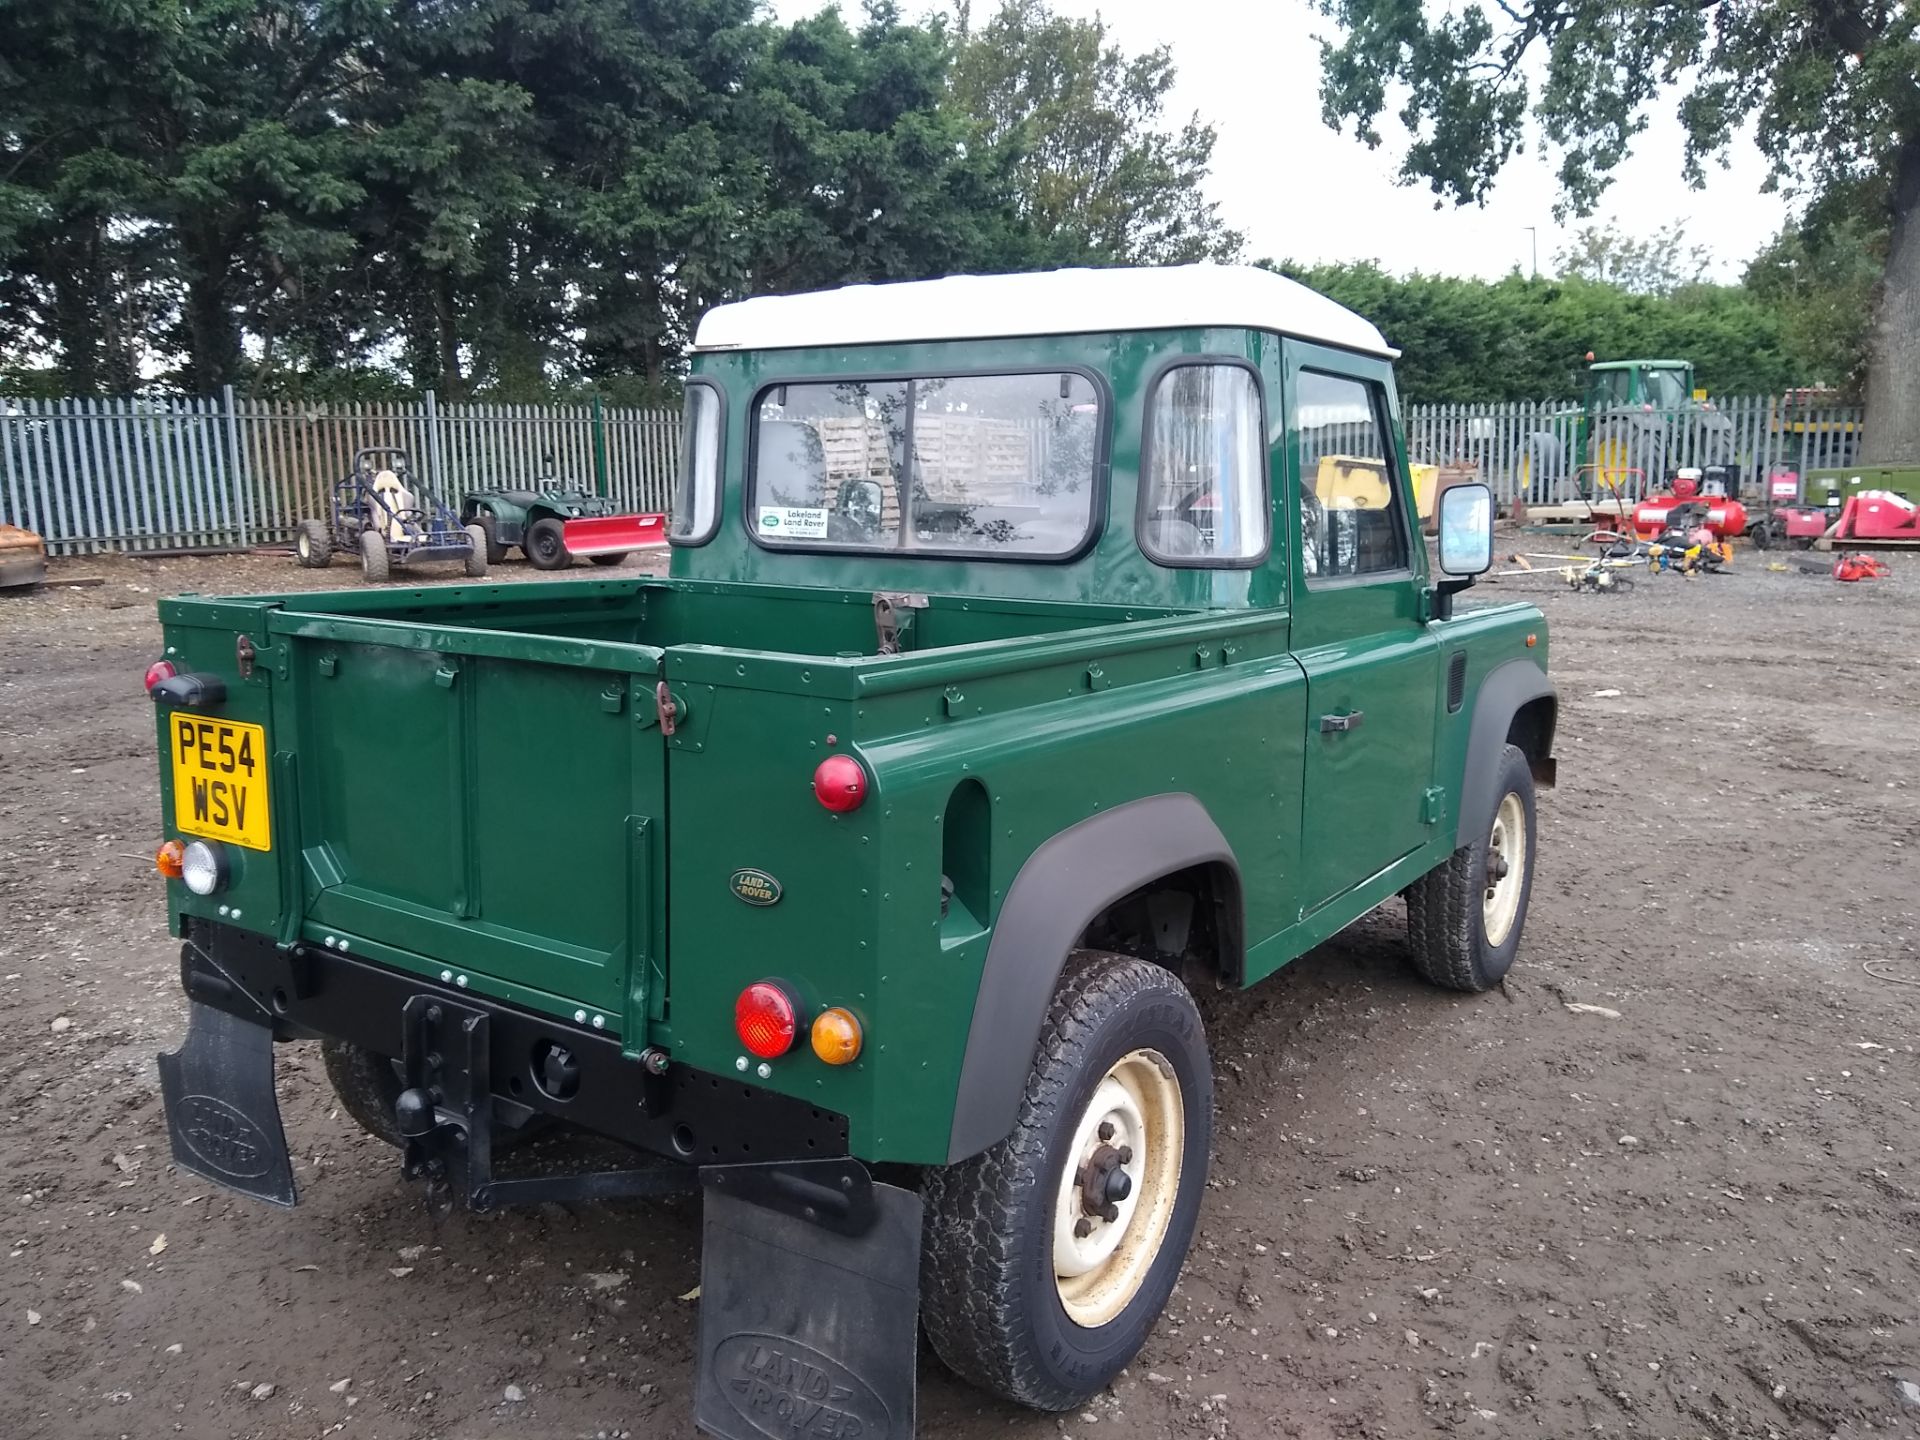 Landrover TD 90 pickup, 2004, one owner, MOT till May 2021, 103,105 miles, gc, PE54WSV - Image 3 of 8